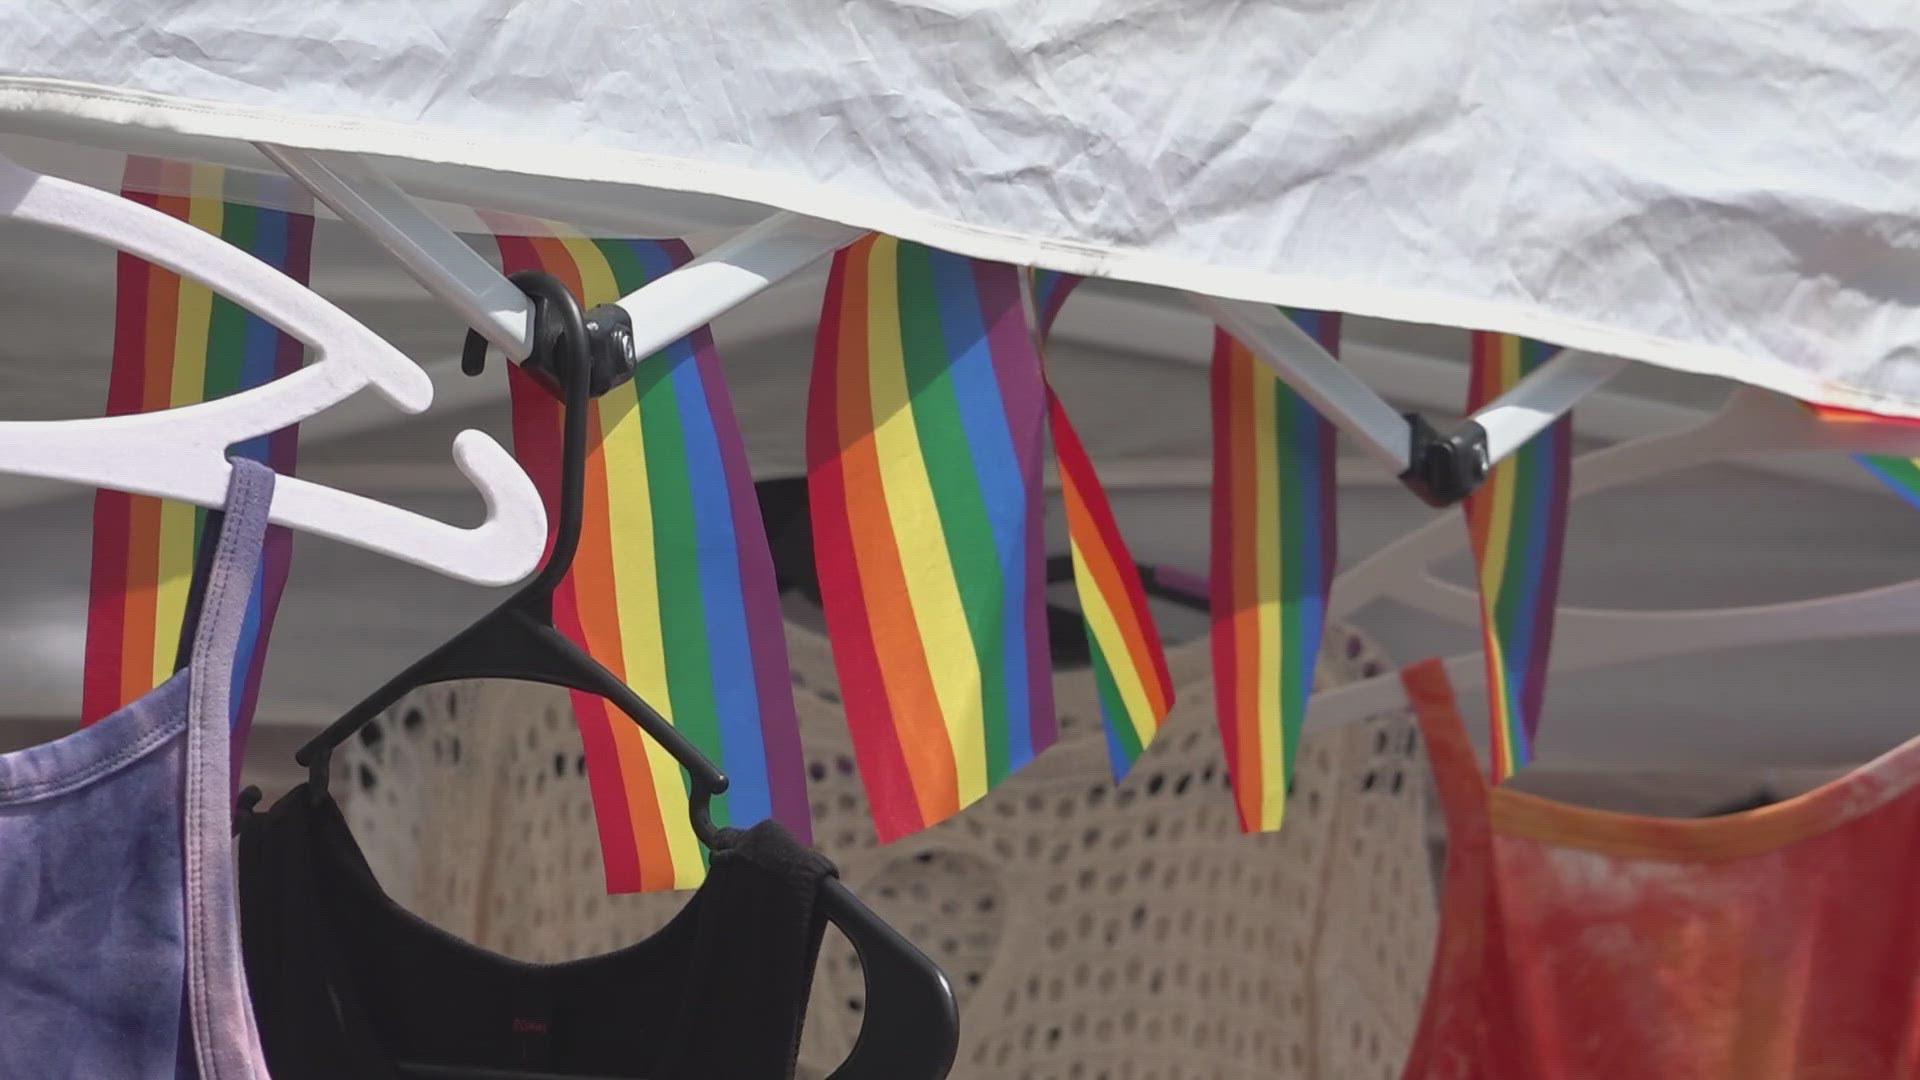 SoKno Pride is one of two pride festivals that occur in Knoxville.